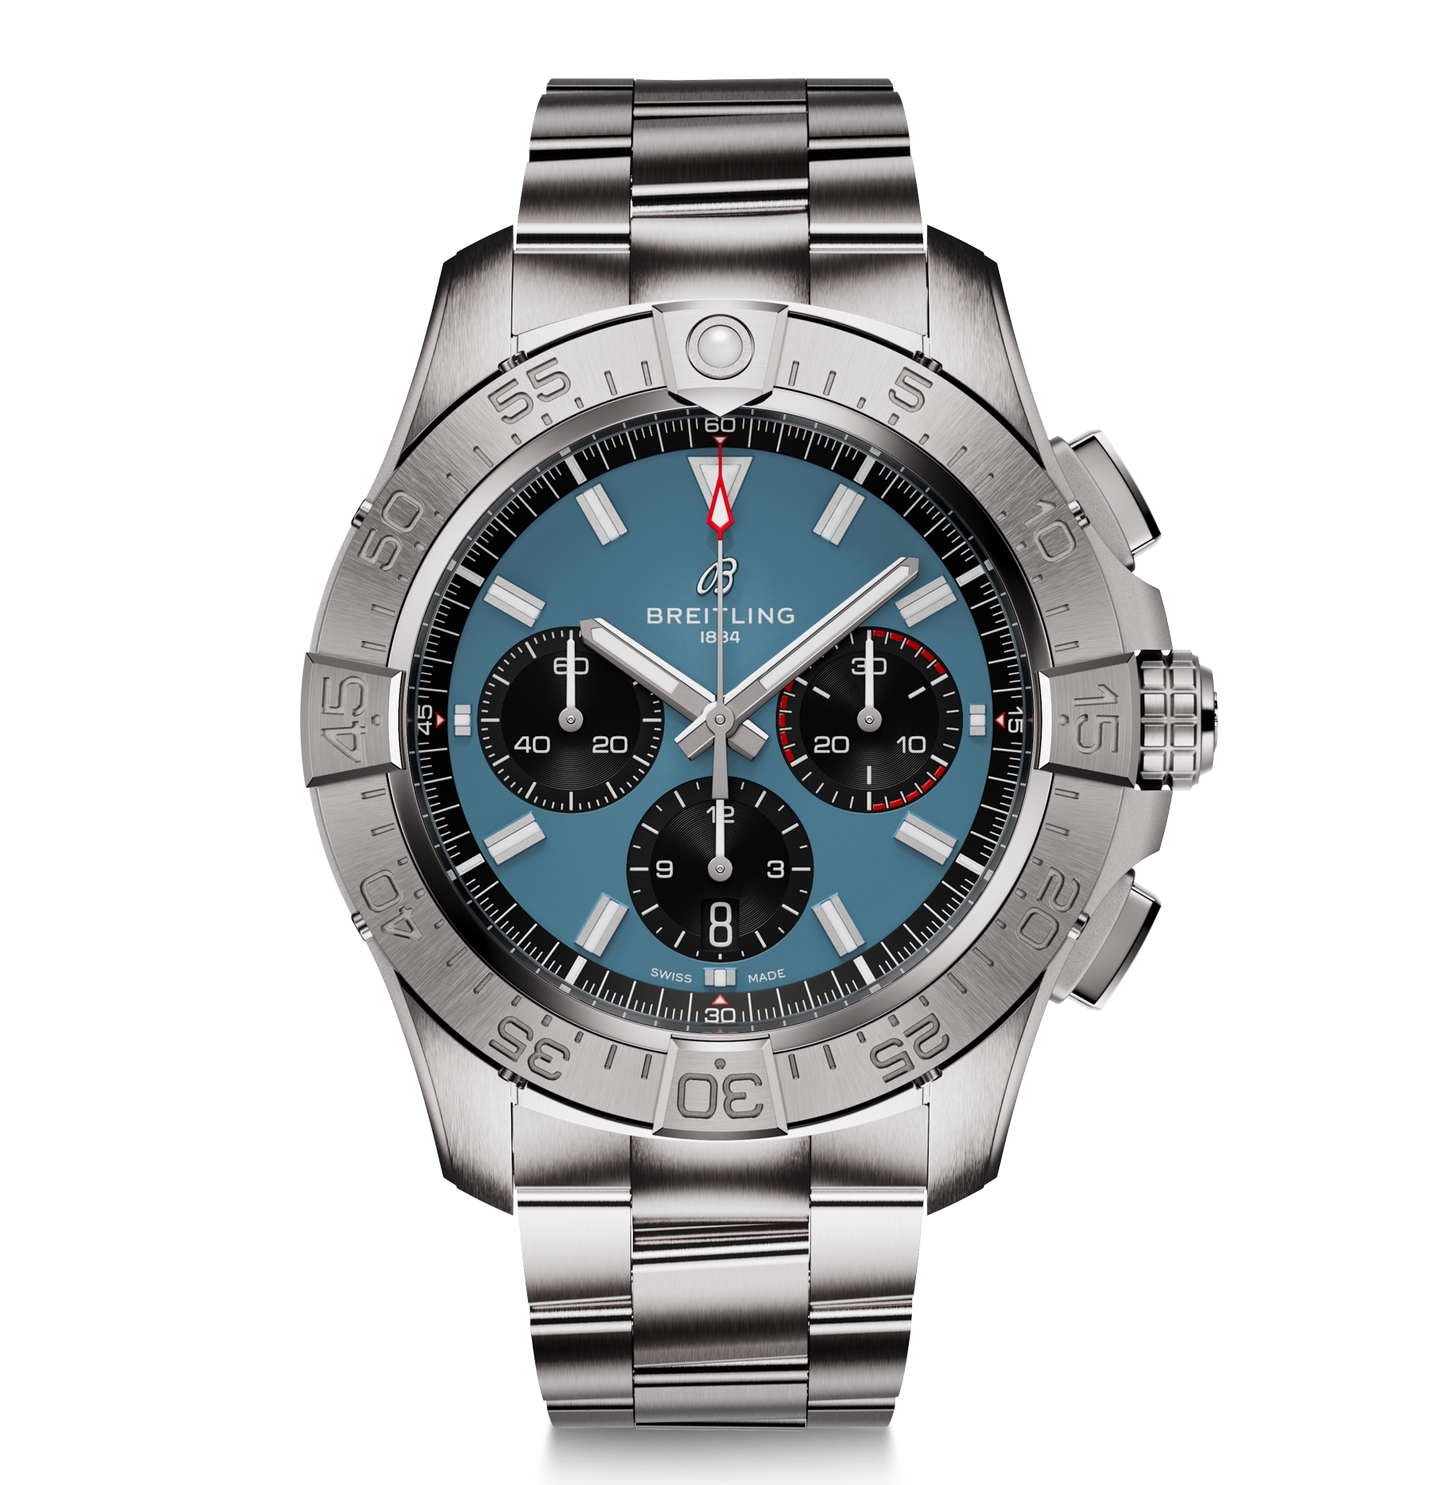 Breitling Avenger B01 Chronograph 44mm Watch with Blue Dial